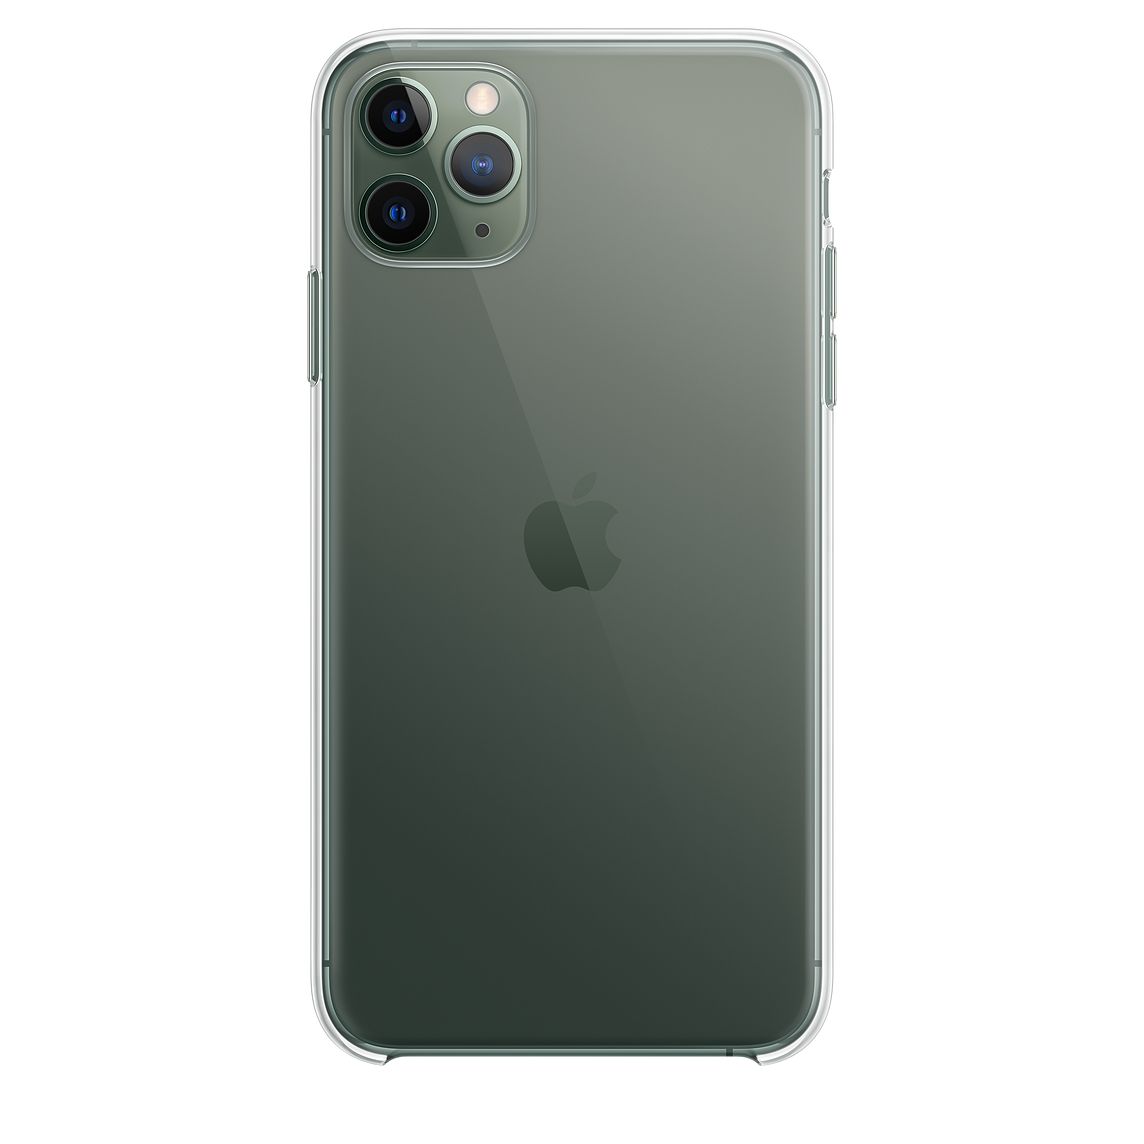 iPhone 11 Pro Max Clear Case Price Online in Nigeria. Lagos and Abuja